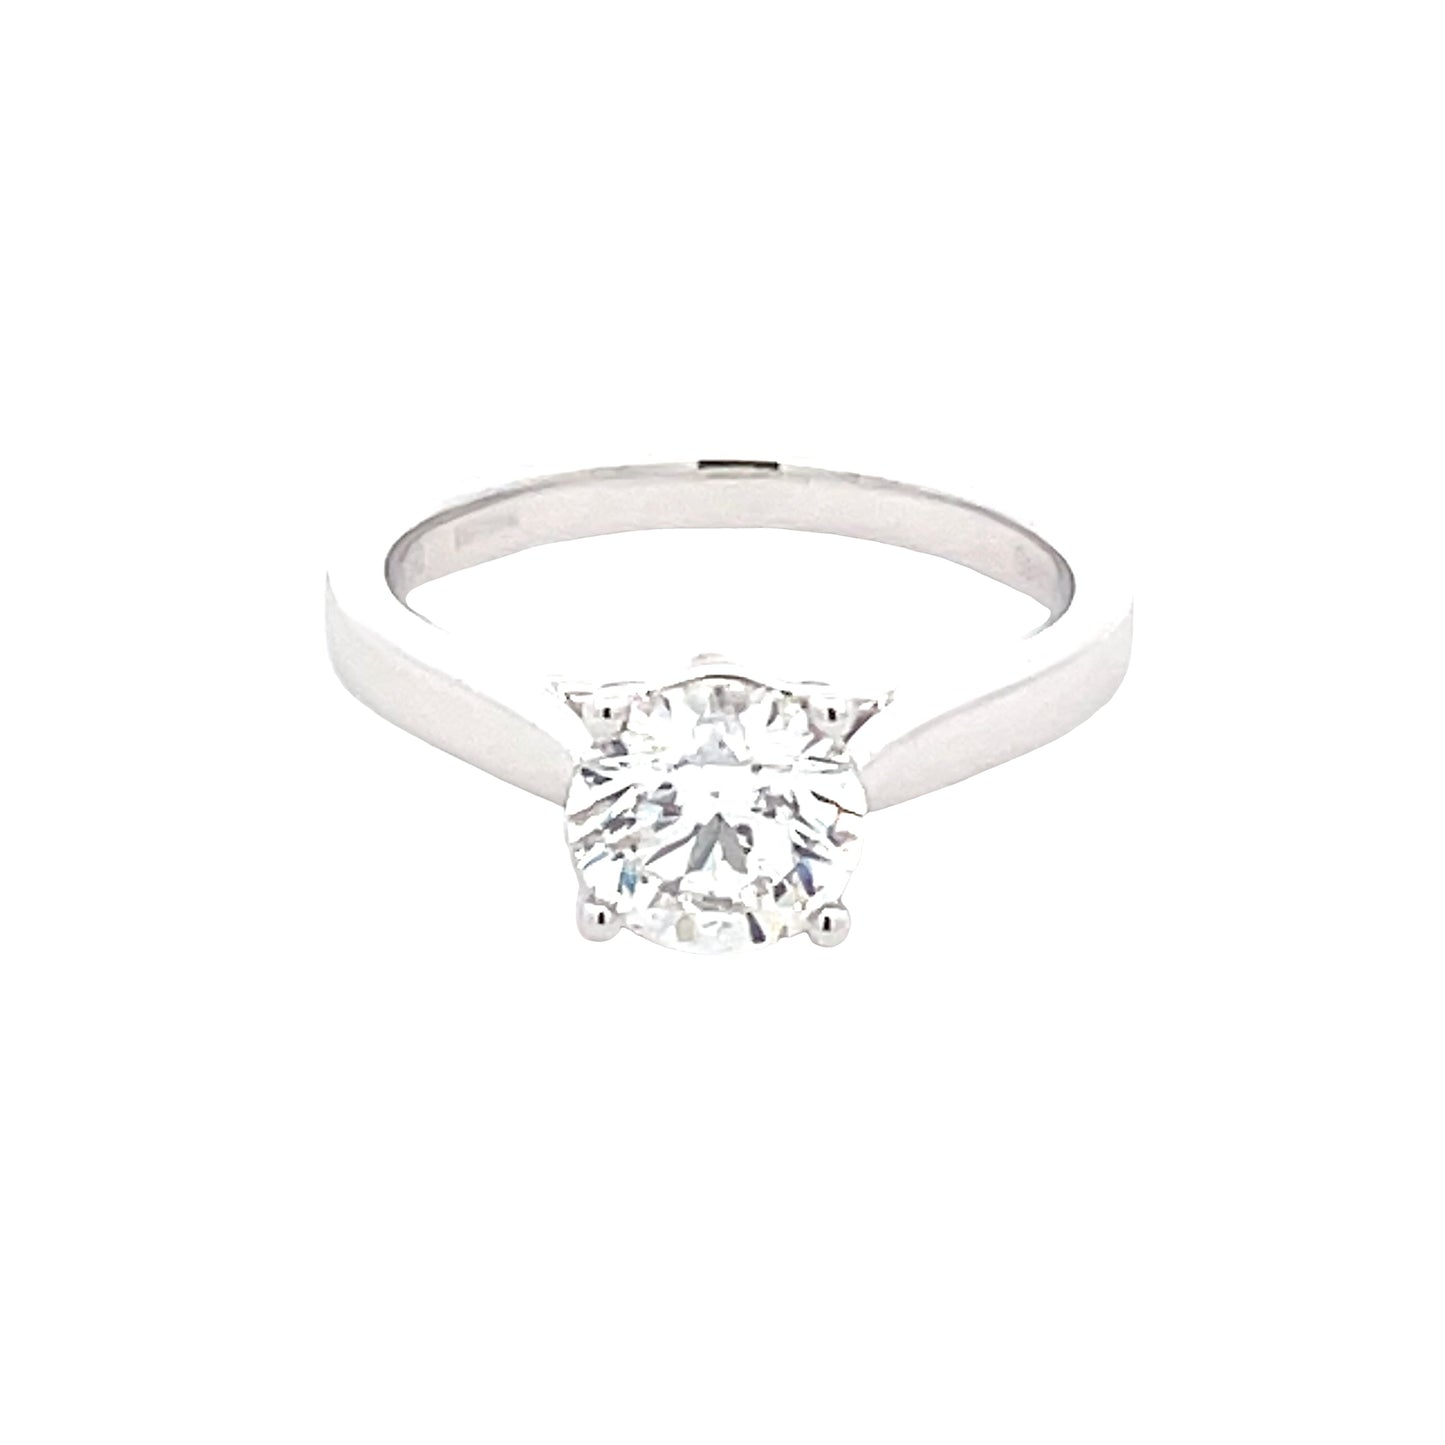 Round Brilliant Cut Diamond Solitaire Ring - 1.25cts  Gardiner Brothers   